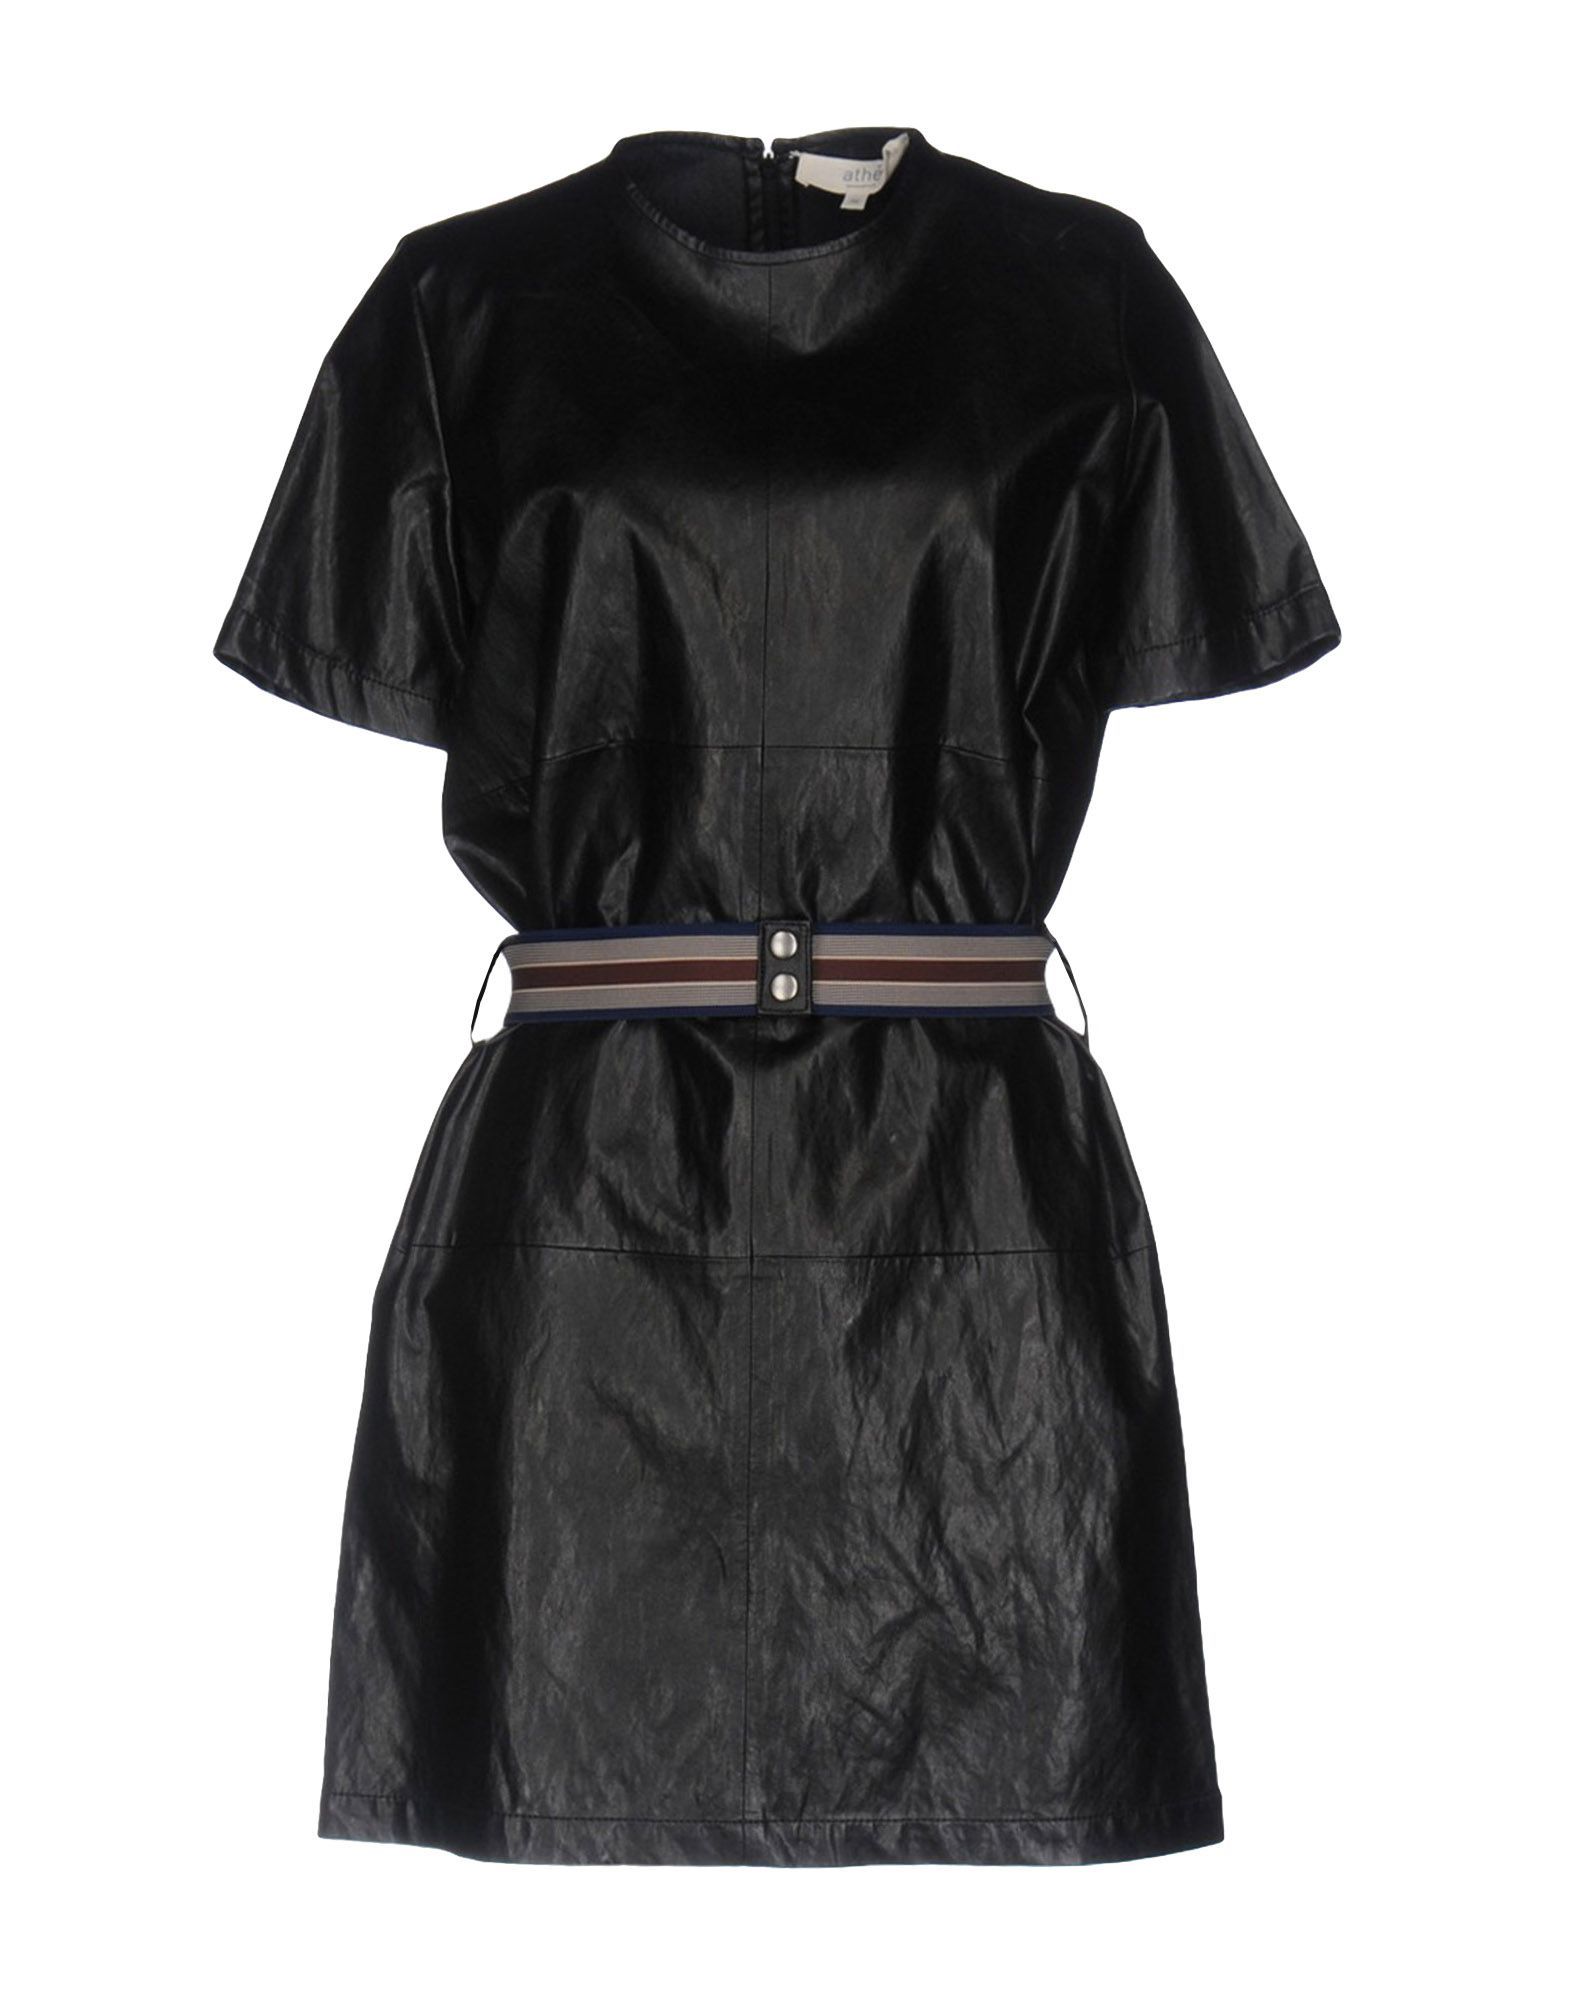 faux leather, belt, solid colour, short sleeves, no pockets, unlined, round collar, rear closure, zip closure, trapeze dress